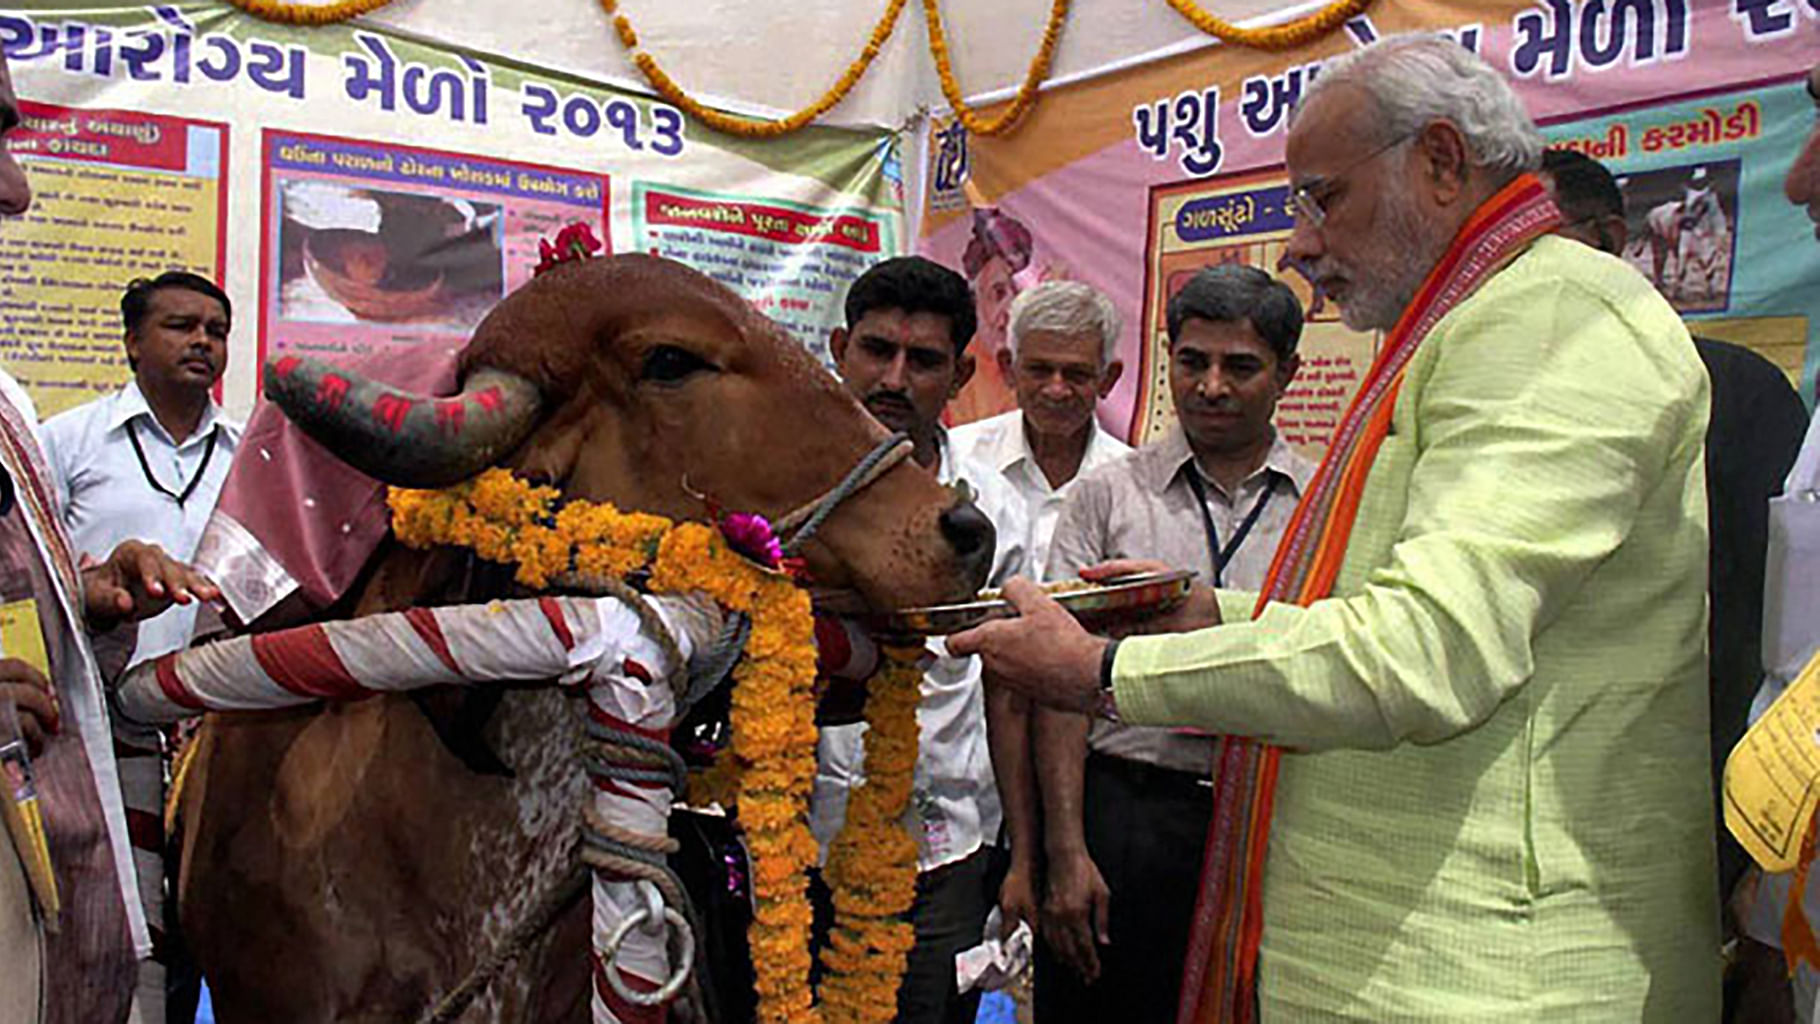 <div class="paragraphs"><p>But the problem runs deeper into the economic policies of the BJP Government for the last thirty years where industrialisation is the ultimate paradigm of development, resulting in haphazard urbanisation that land for the cattle to graze is shrinking</p></div>